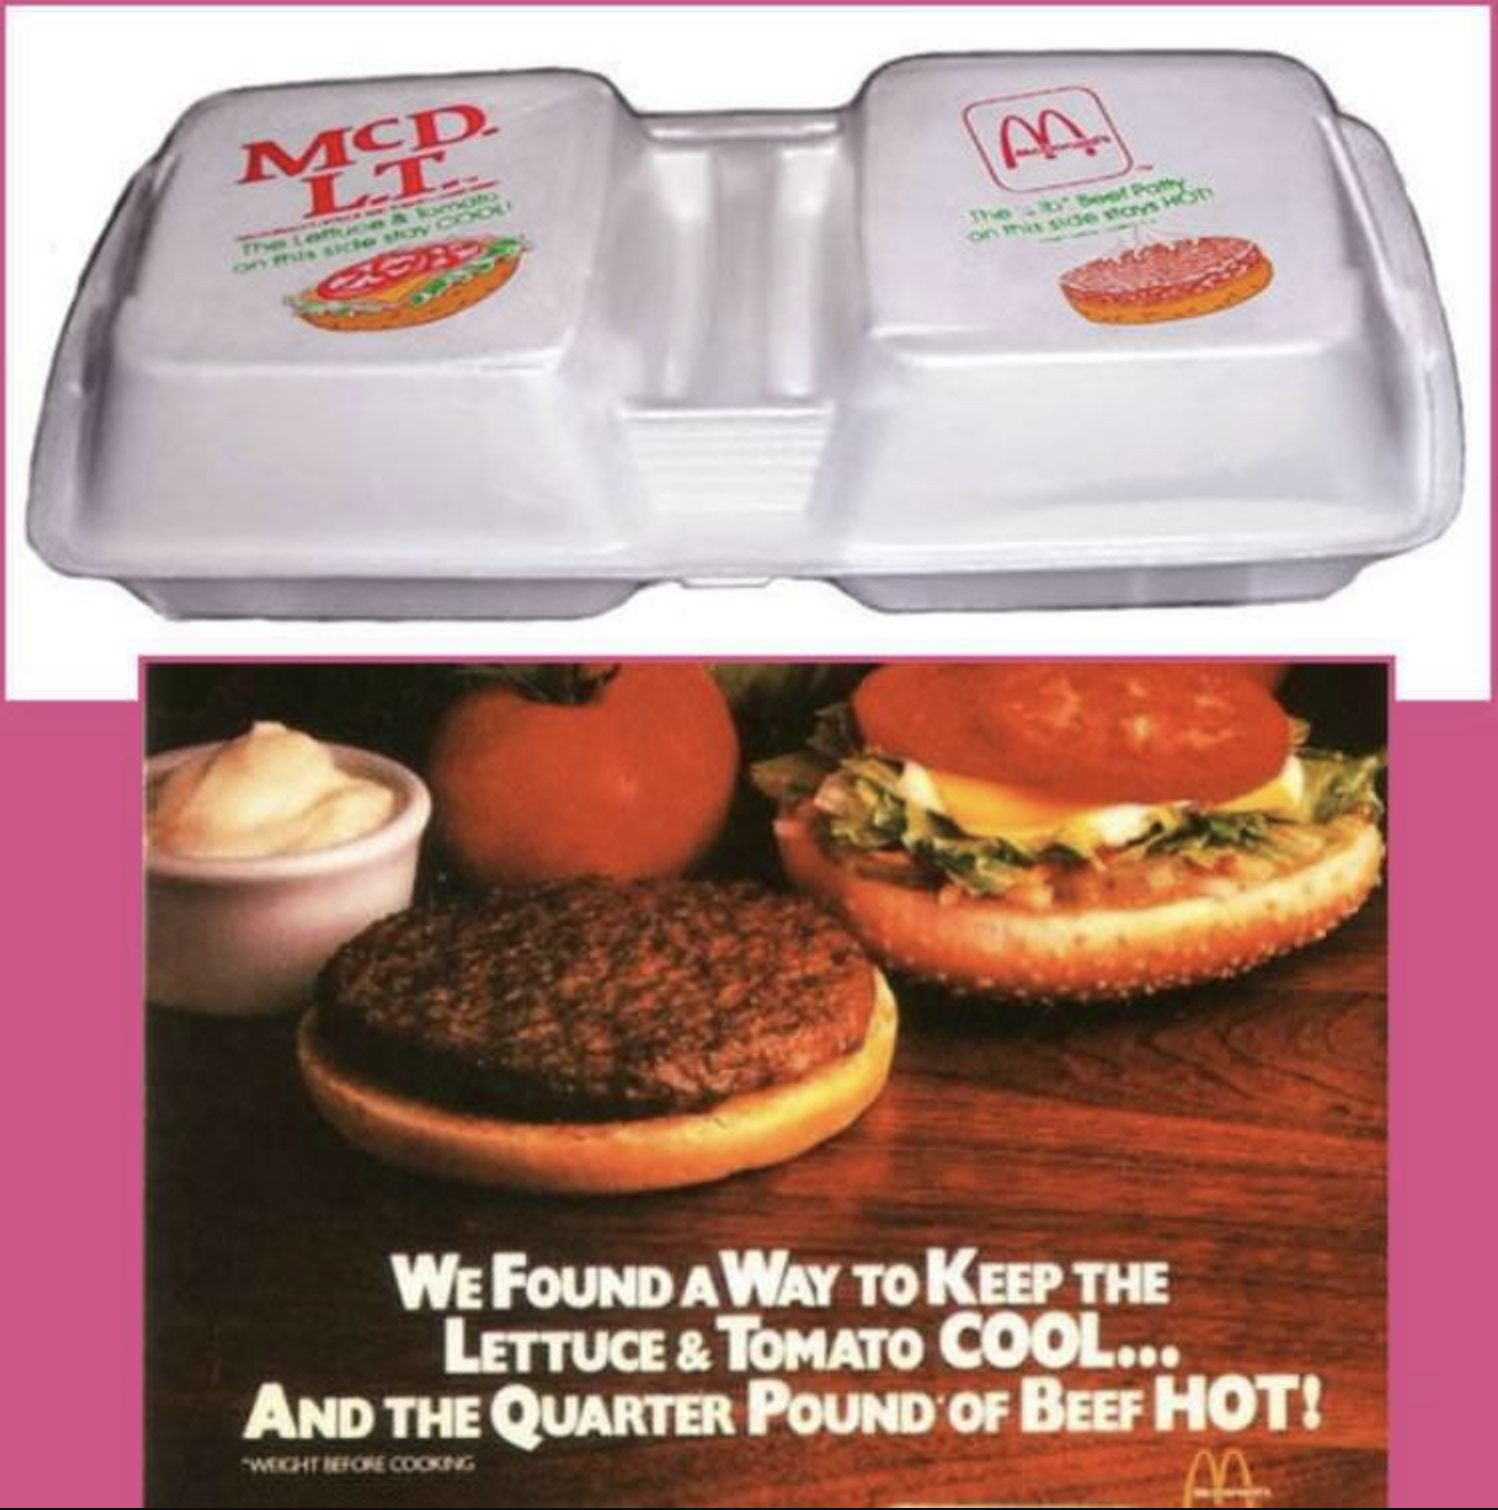 Poster for the McDLT, which &quot;found a way to keep the lettuce and tomato cool...and the quarter pound of beef hot!&quot;